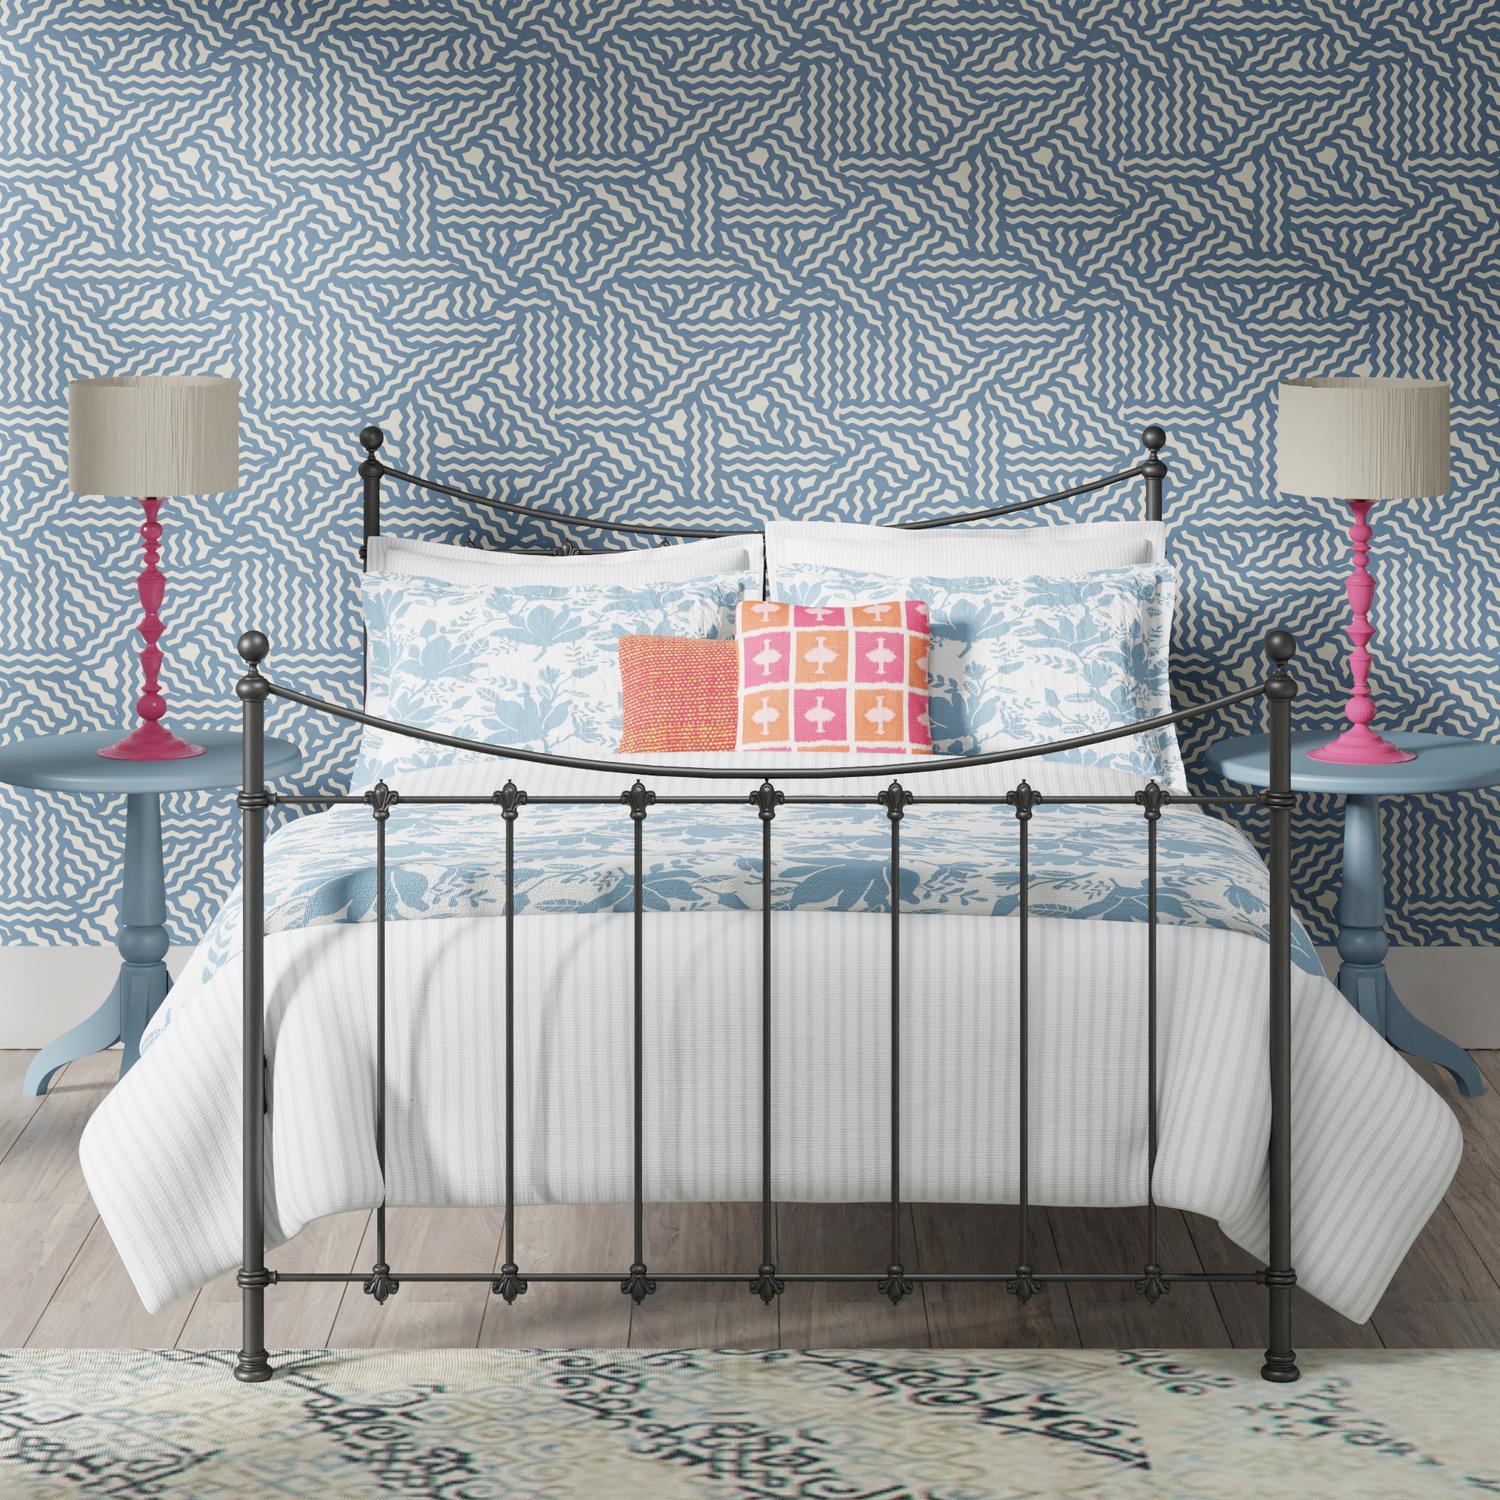 Chatsworth iron bed - Black iron bed in a blue and pink bedroom